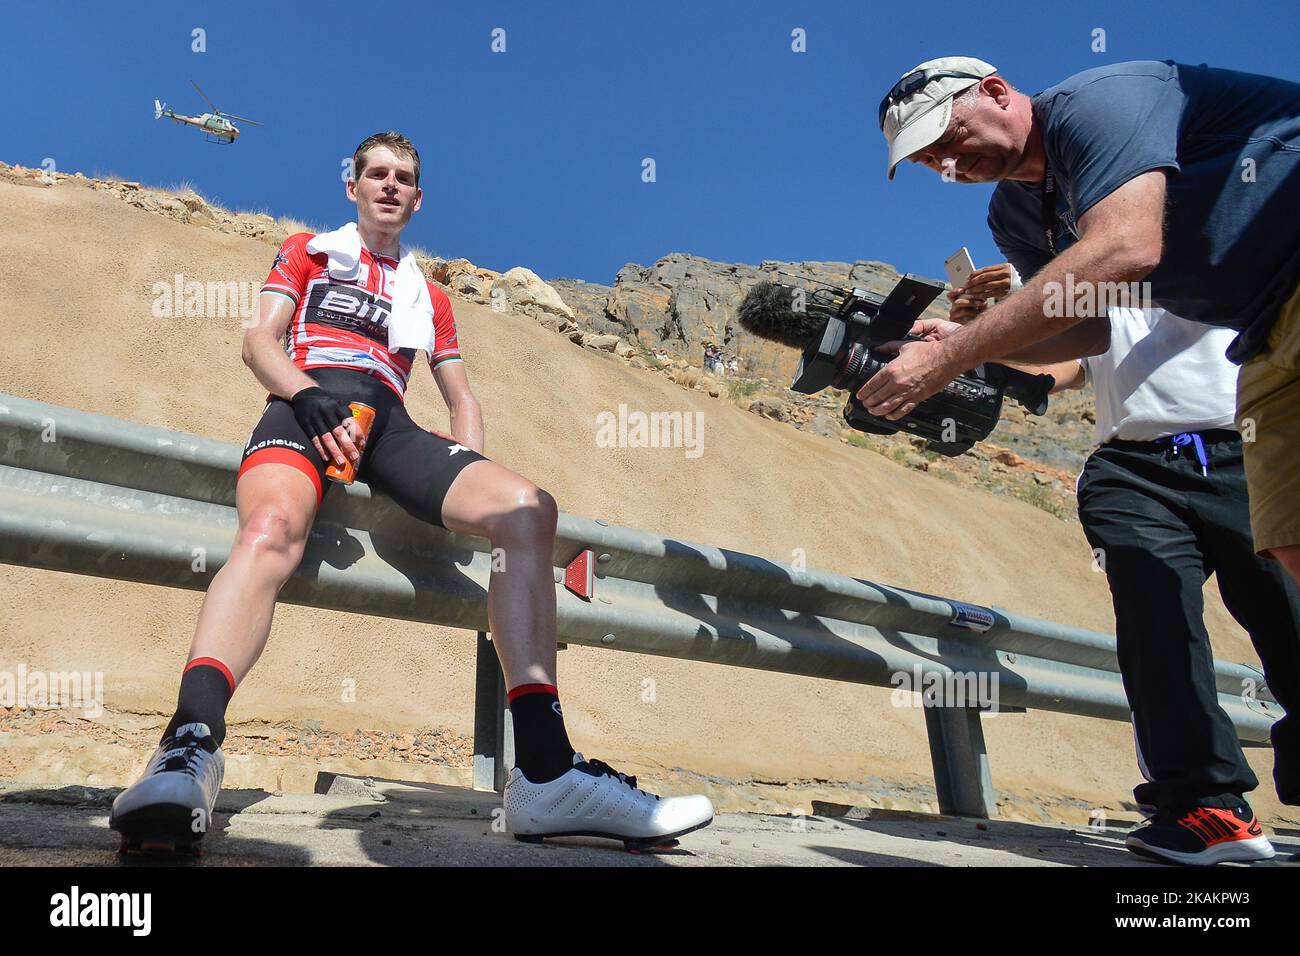 Ben HERMANS from BMC Racing Team enjoys a fresh drink at the finish line, after he wins the fifth stage, a 152.5km from Sama'il to Jabal Al Akhdhar (Green Mountain), at the 2017 cycling Tour of Oman. On Saturday, February 18, 2017, in Jabal Al Akhdhar, Ad Dakhiliyah Region, Oman. Photo by Artur Widak *** Please Use Credit from Credit Field ***  Stock Photo